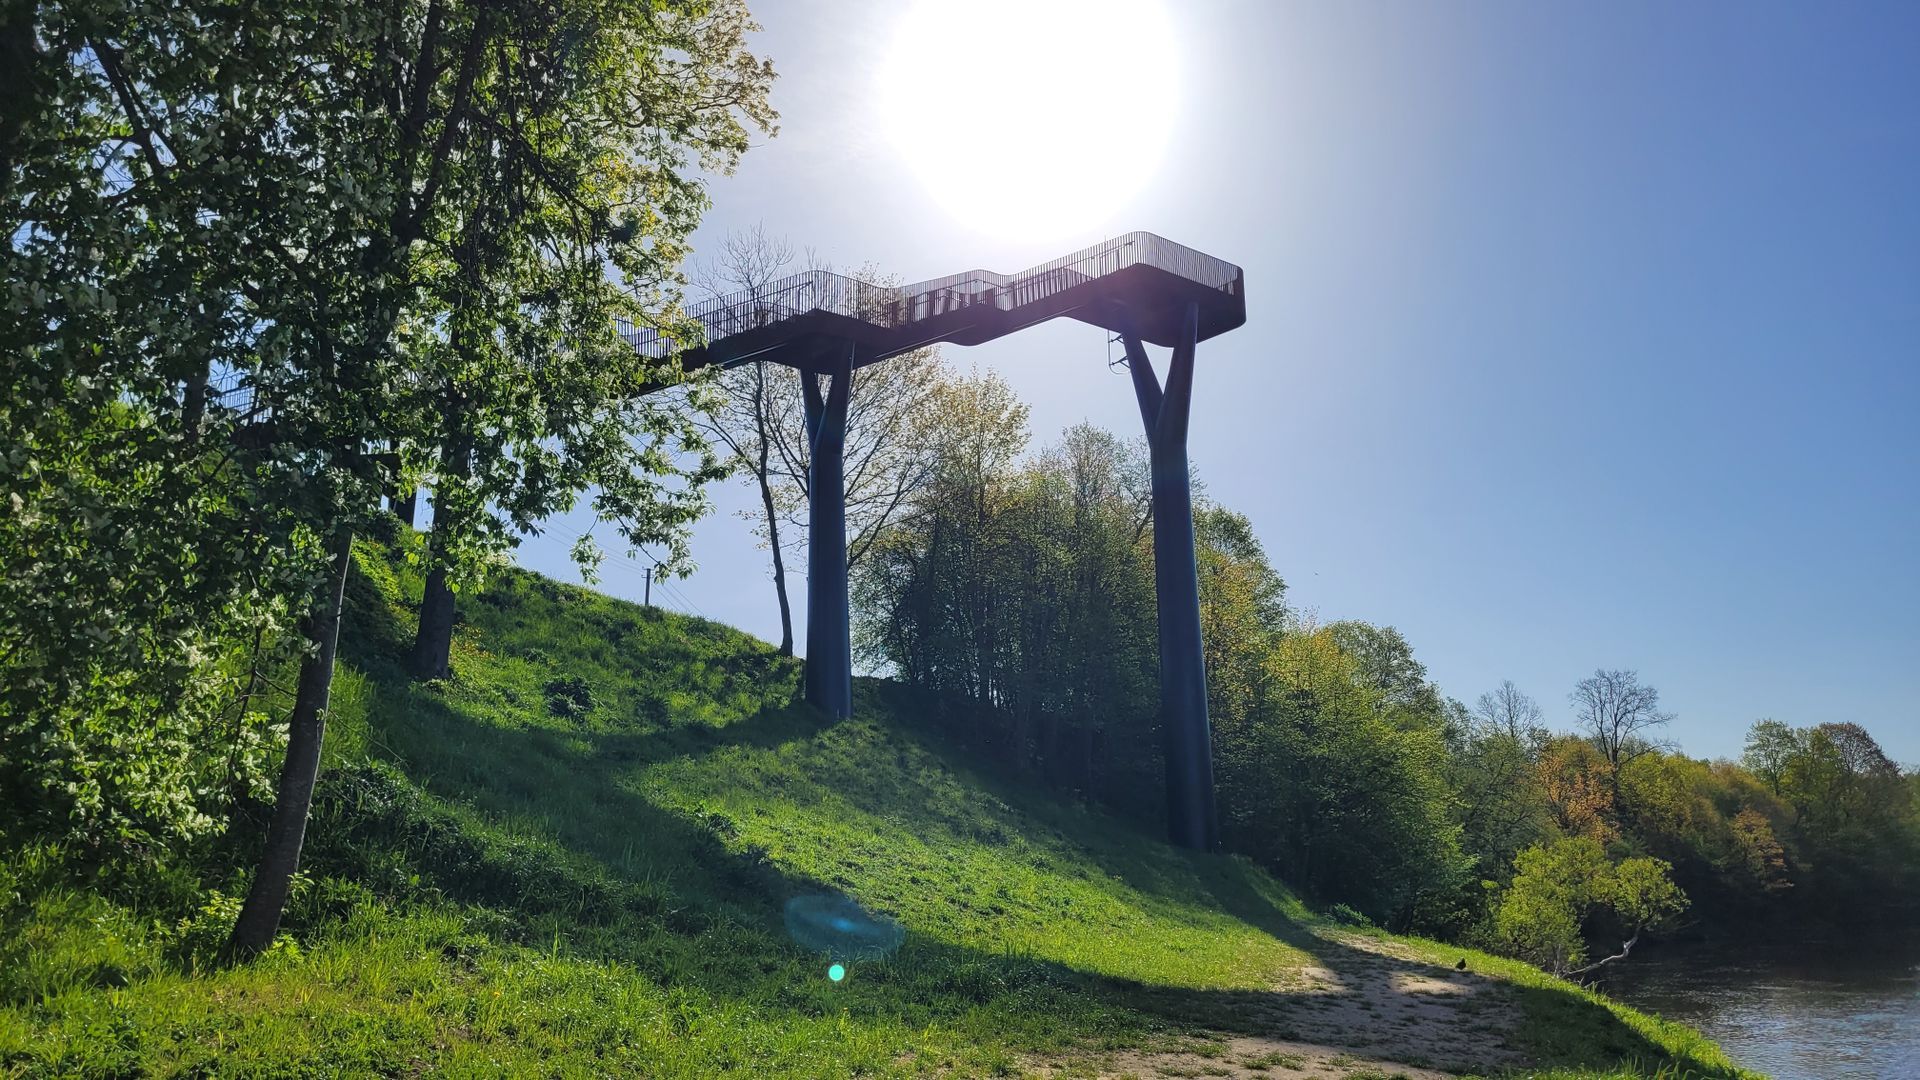 Observation Tower of Jūra and Akmena Rivers Confluence